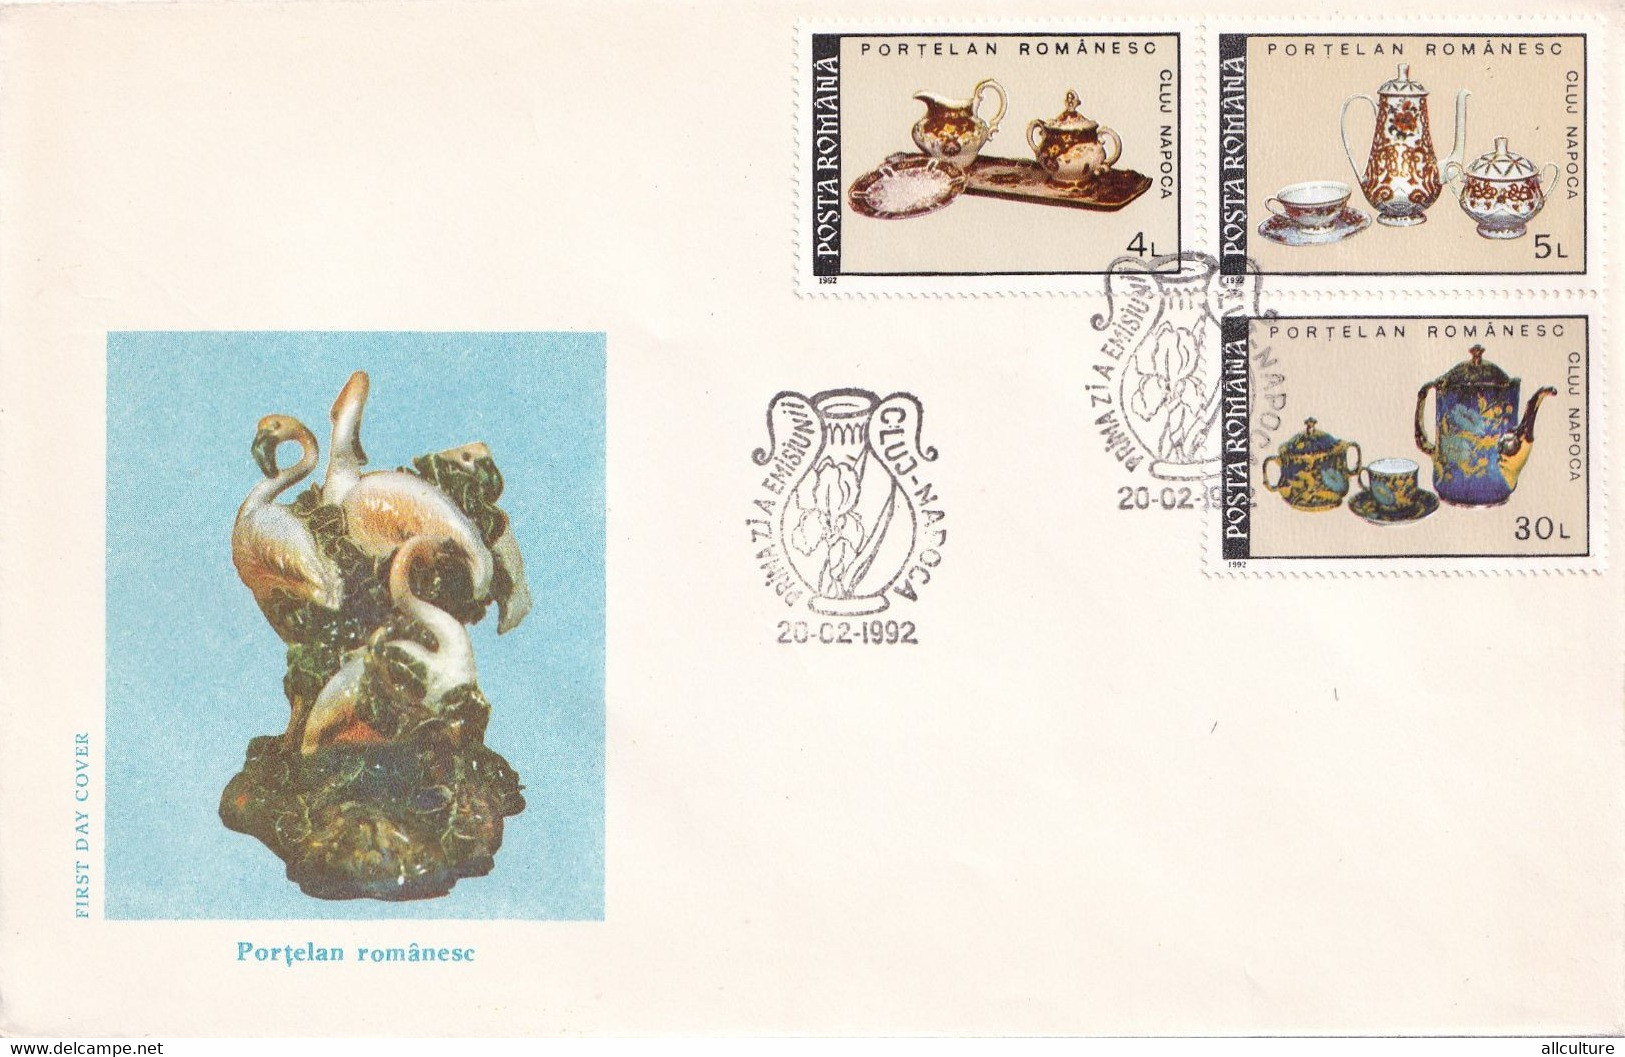 A2852 - Romanian Porcelain, Romania, Cluj Napoca 1992 2 Covers First Day Cover - Porcelain